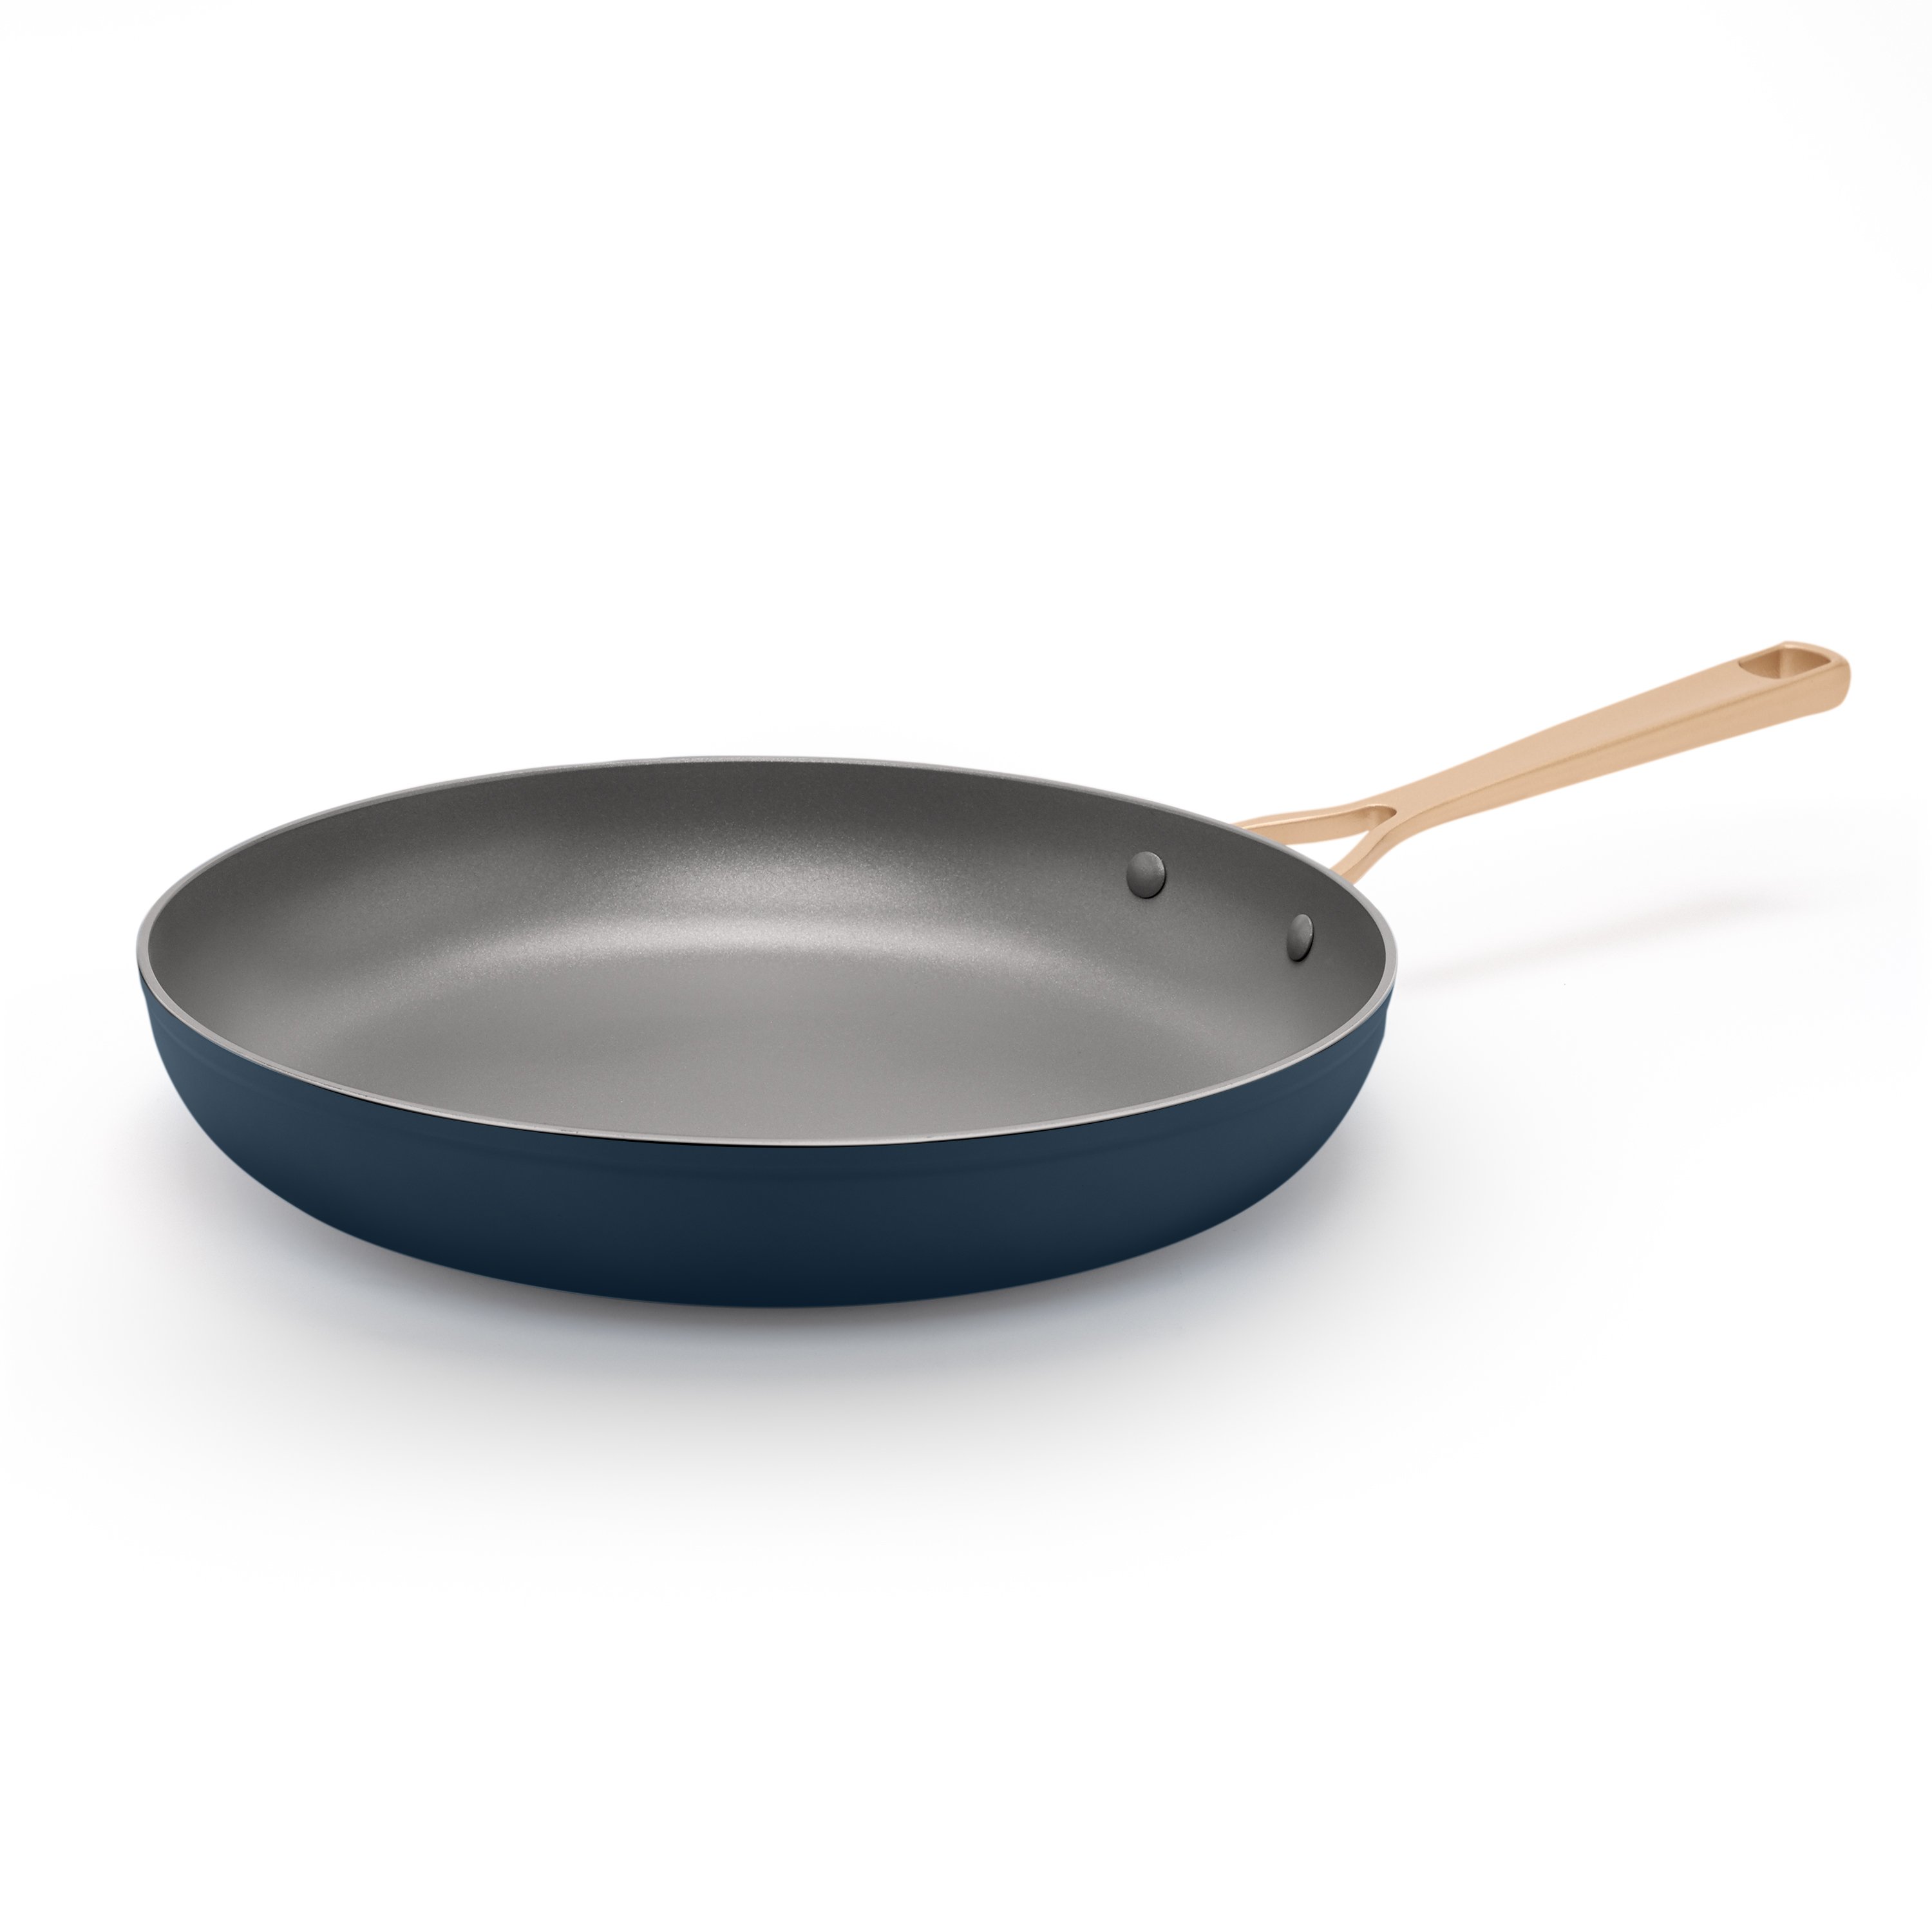 Nonstick Skillet 12 Gold , Frying Pan with Stainless Steel Induction Base